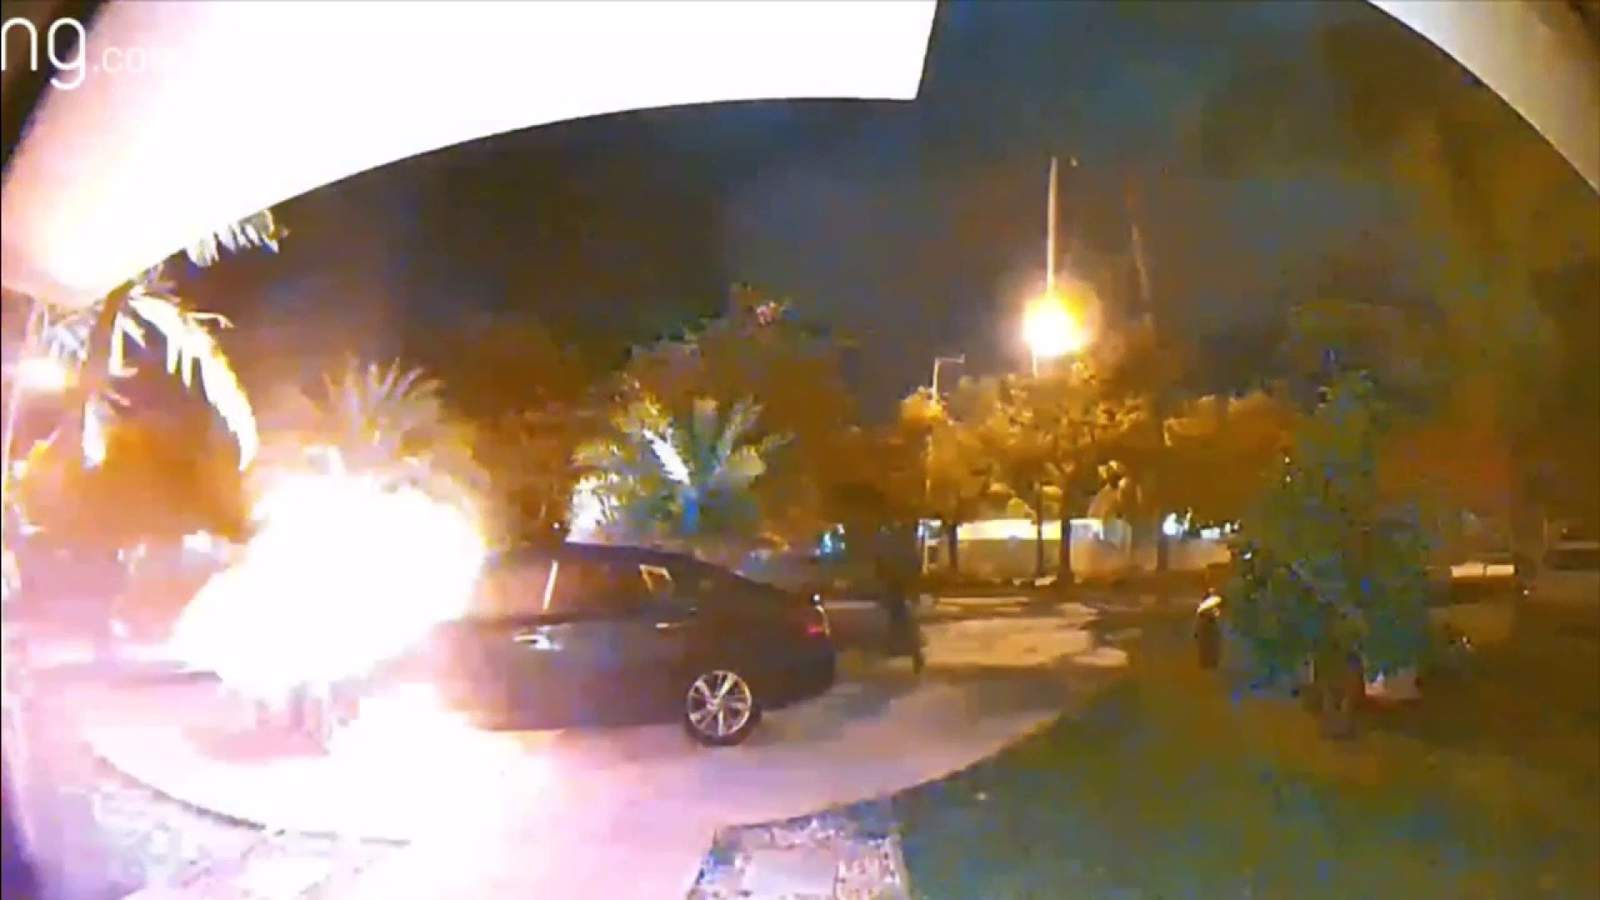 Video shows arsonist set parked cars on fire in Cutler Bay